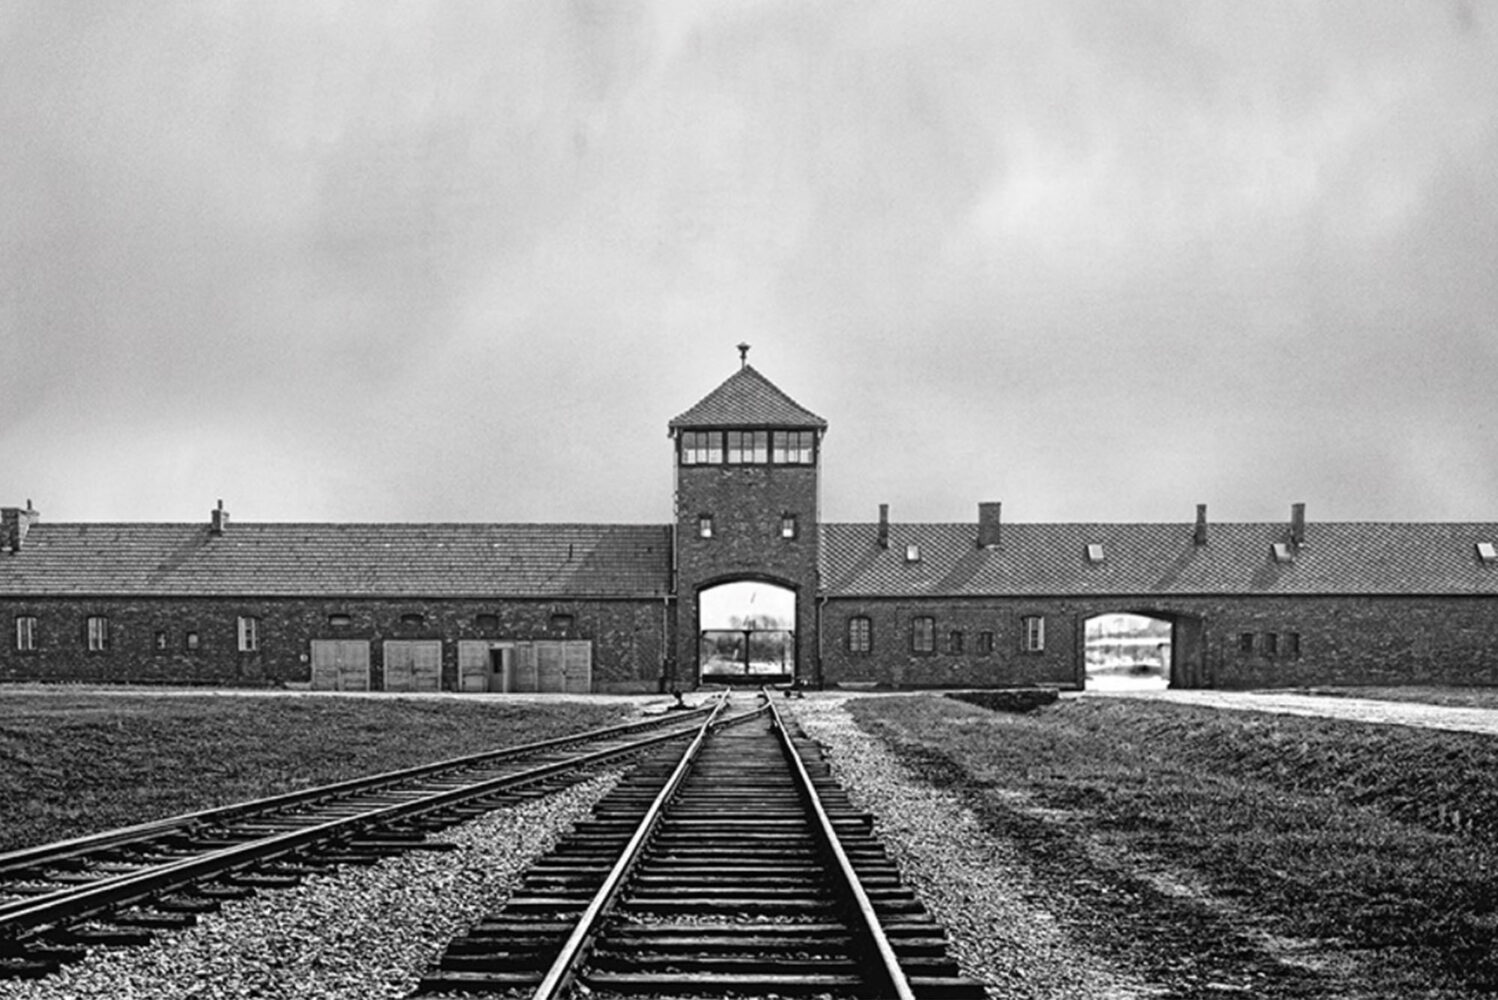 Photo: Train tracks leading to the entrance of Auschwitz.